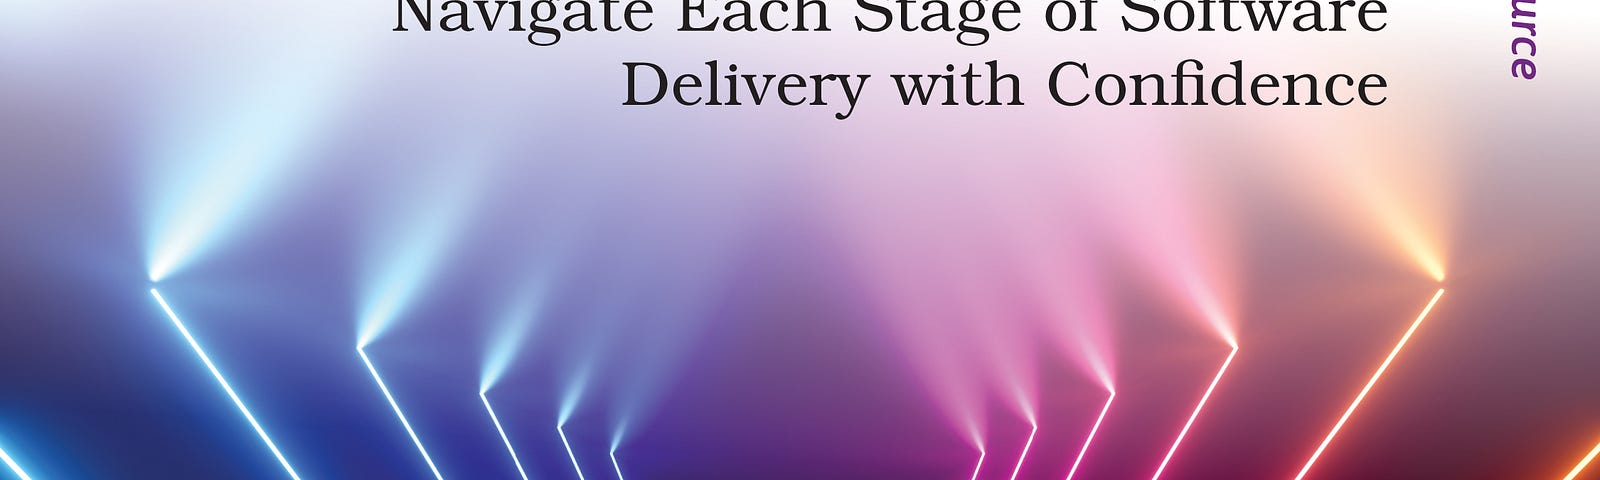 Book cover featuring purple and pink hues of light beams bent into a gem-like shape